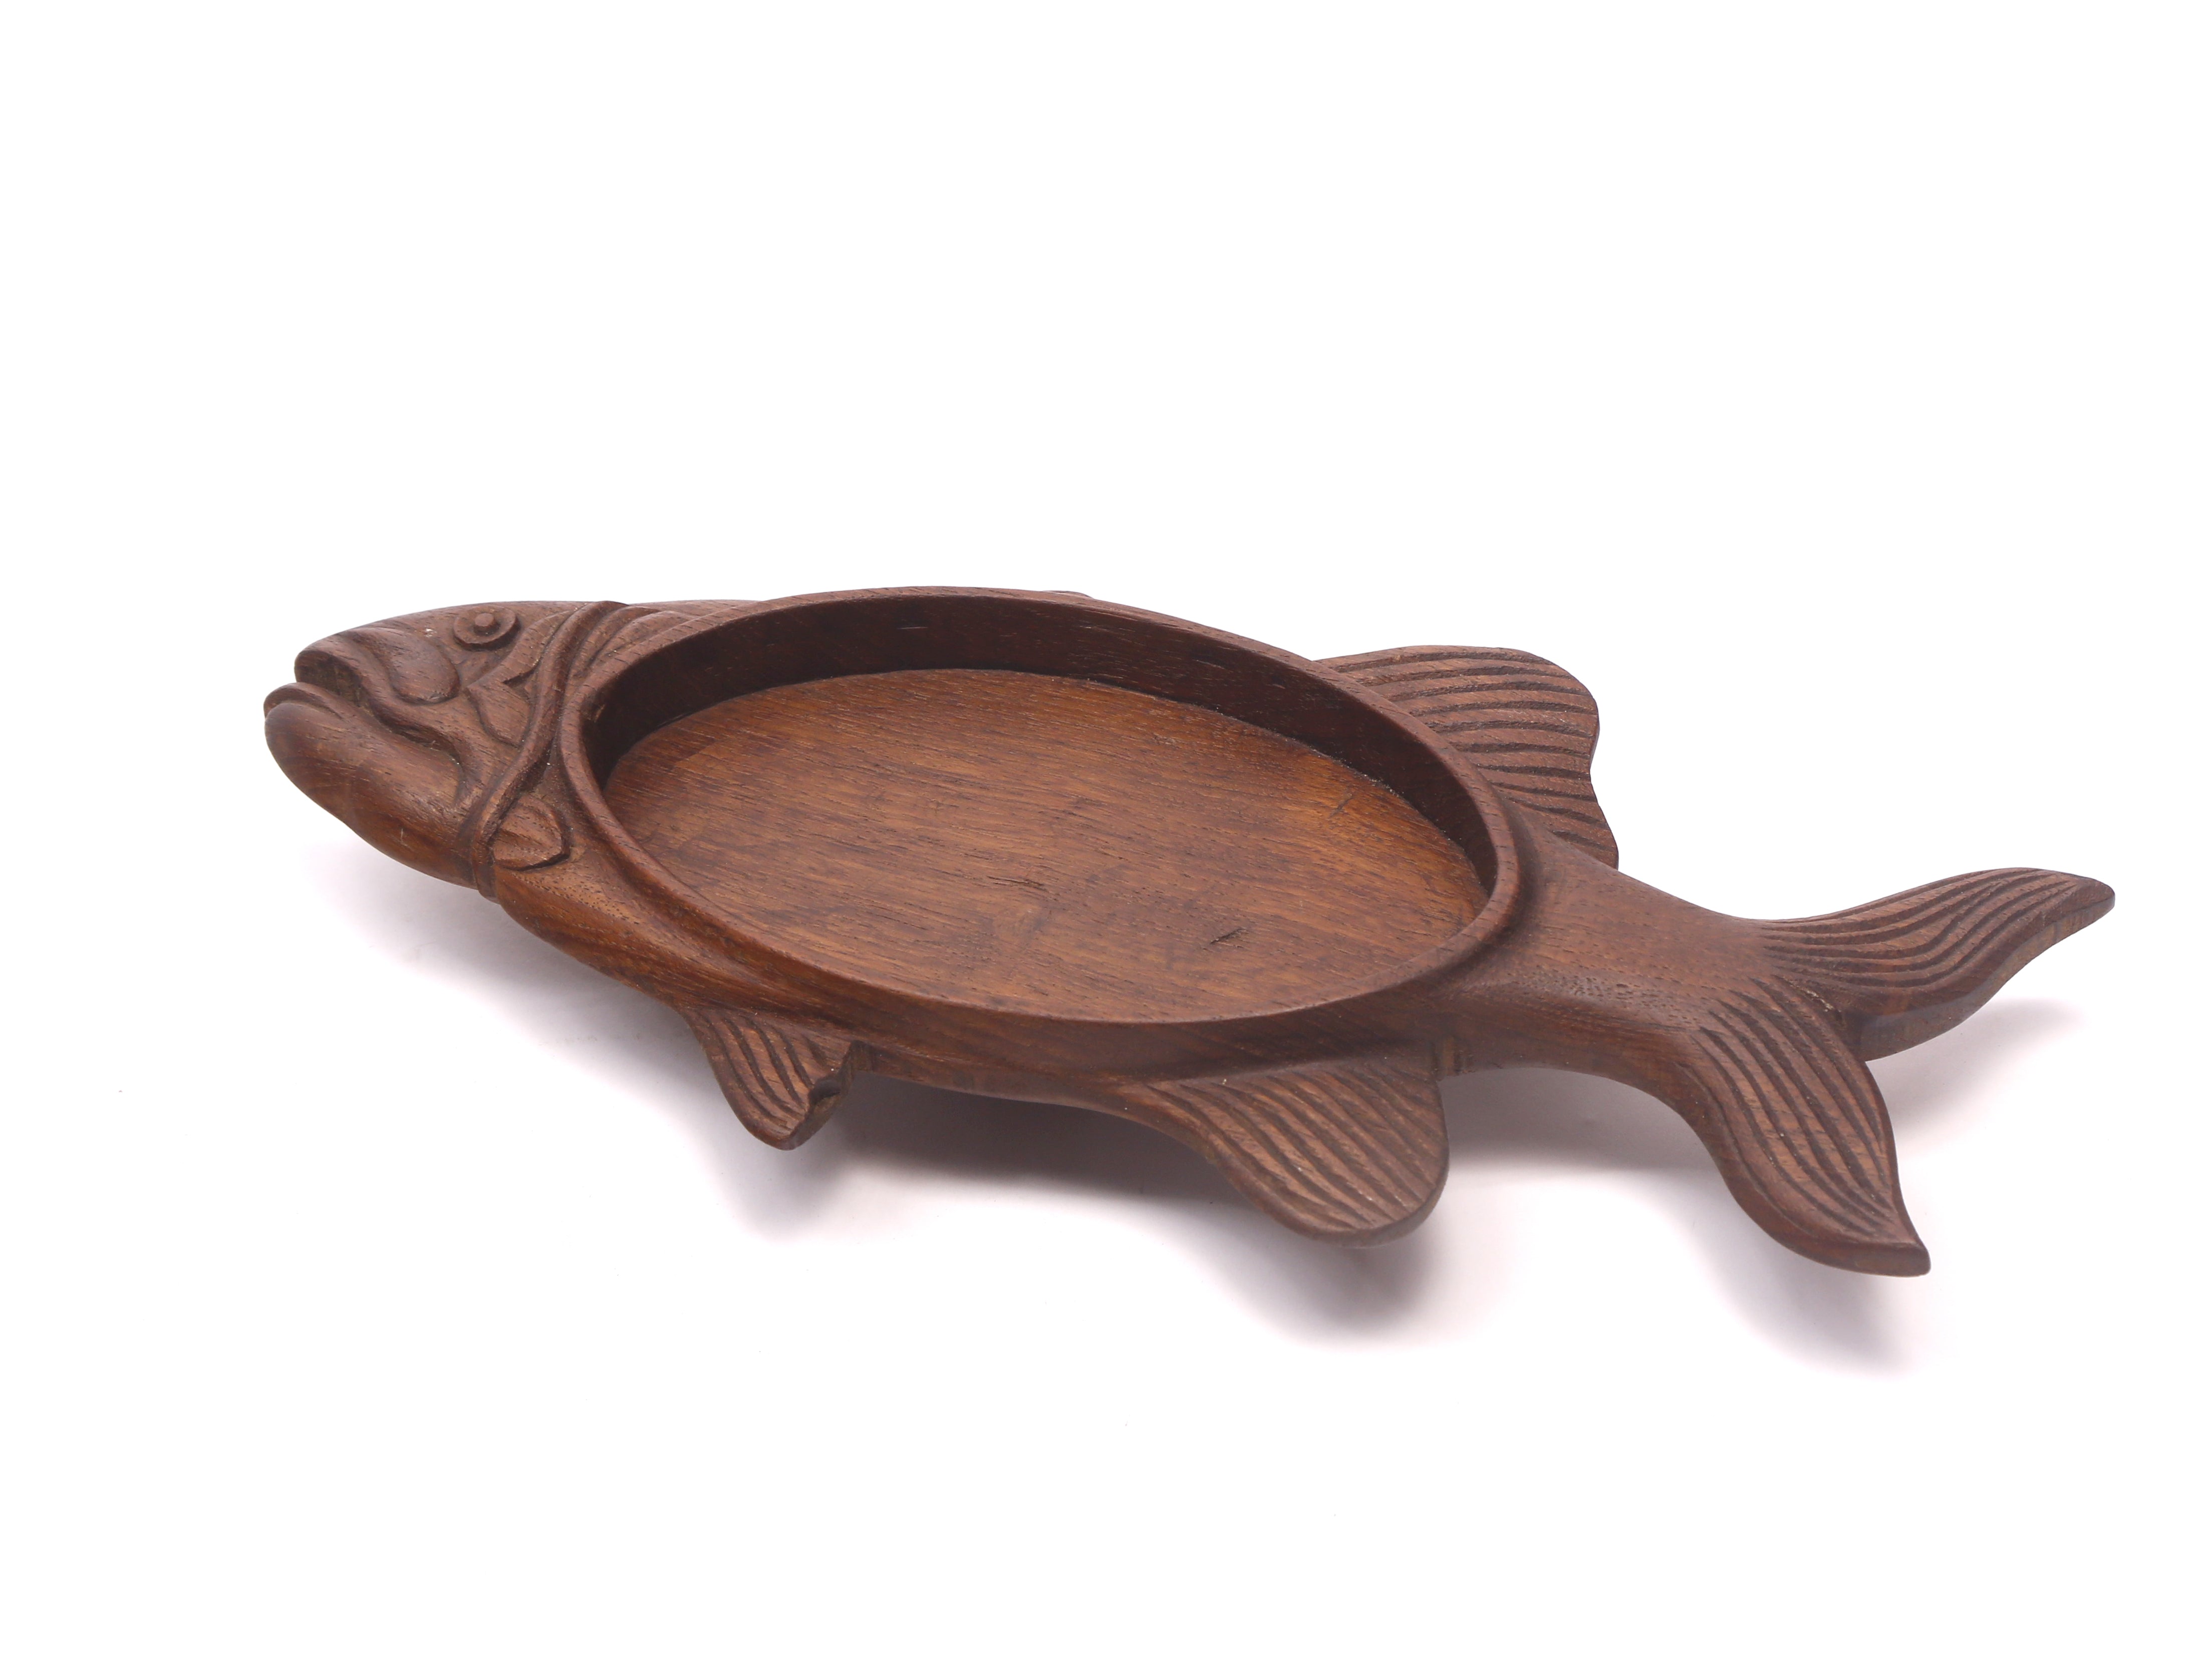 Wooden Scooped Out Fish Tray